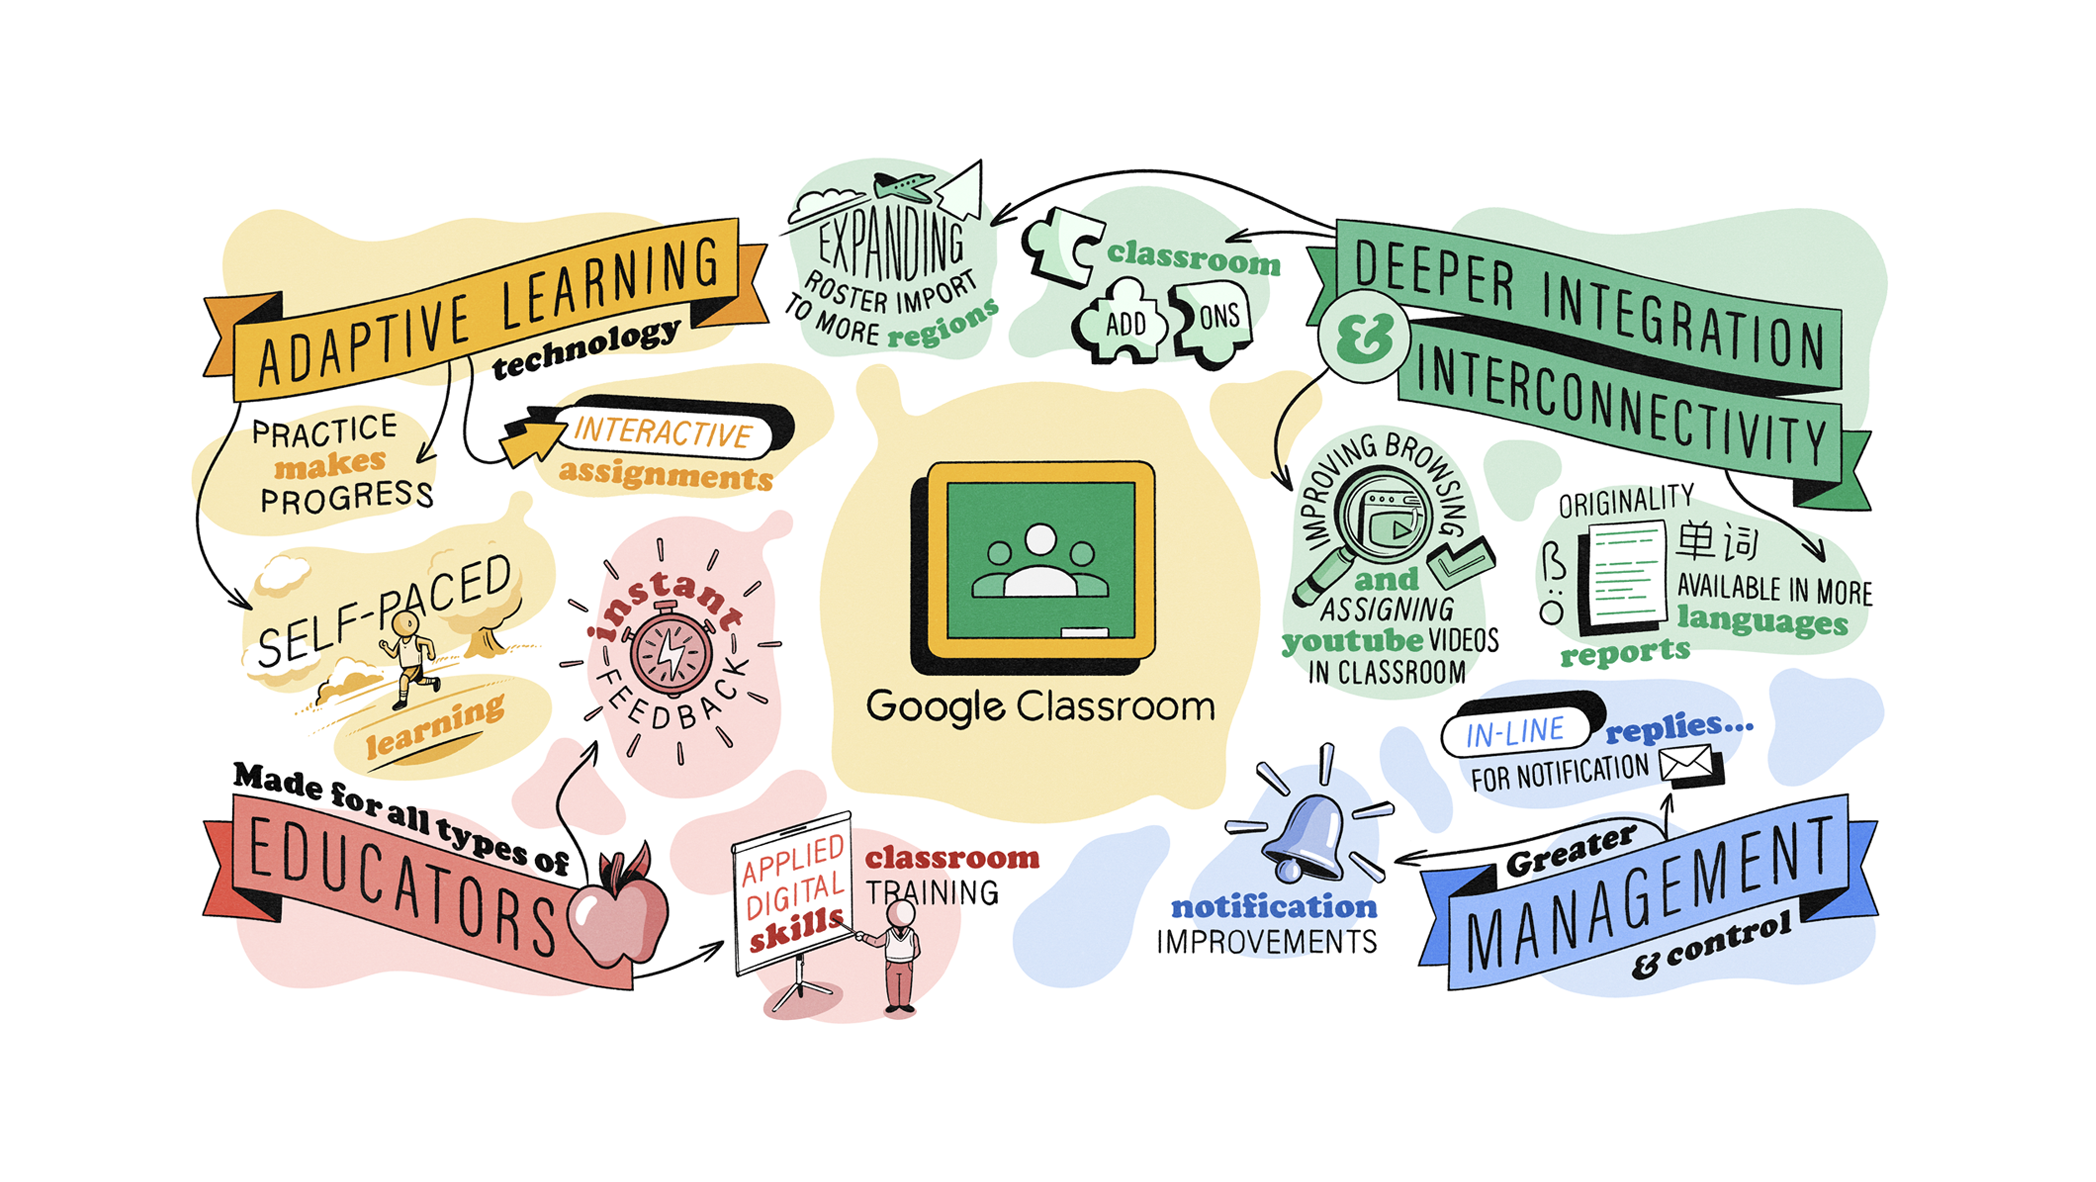 How to Create Assignments for Google Classroom – Help Center